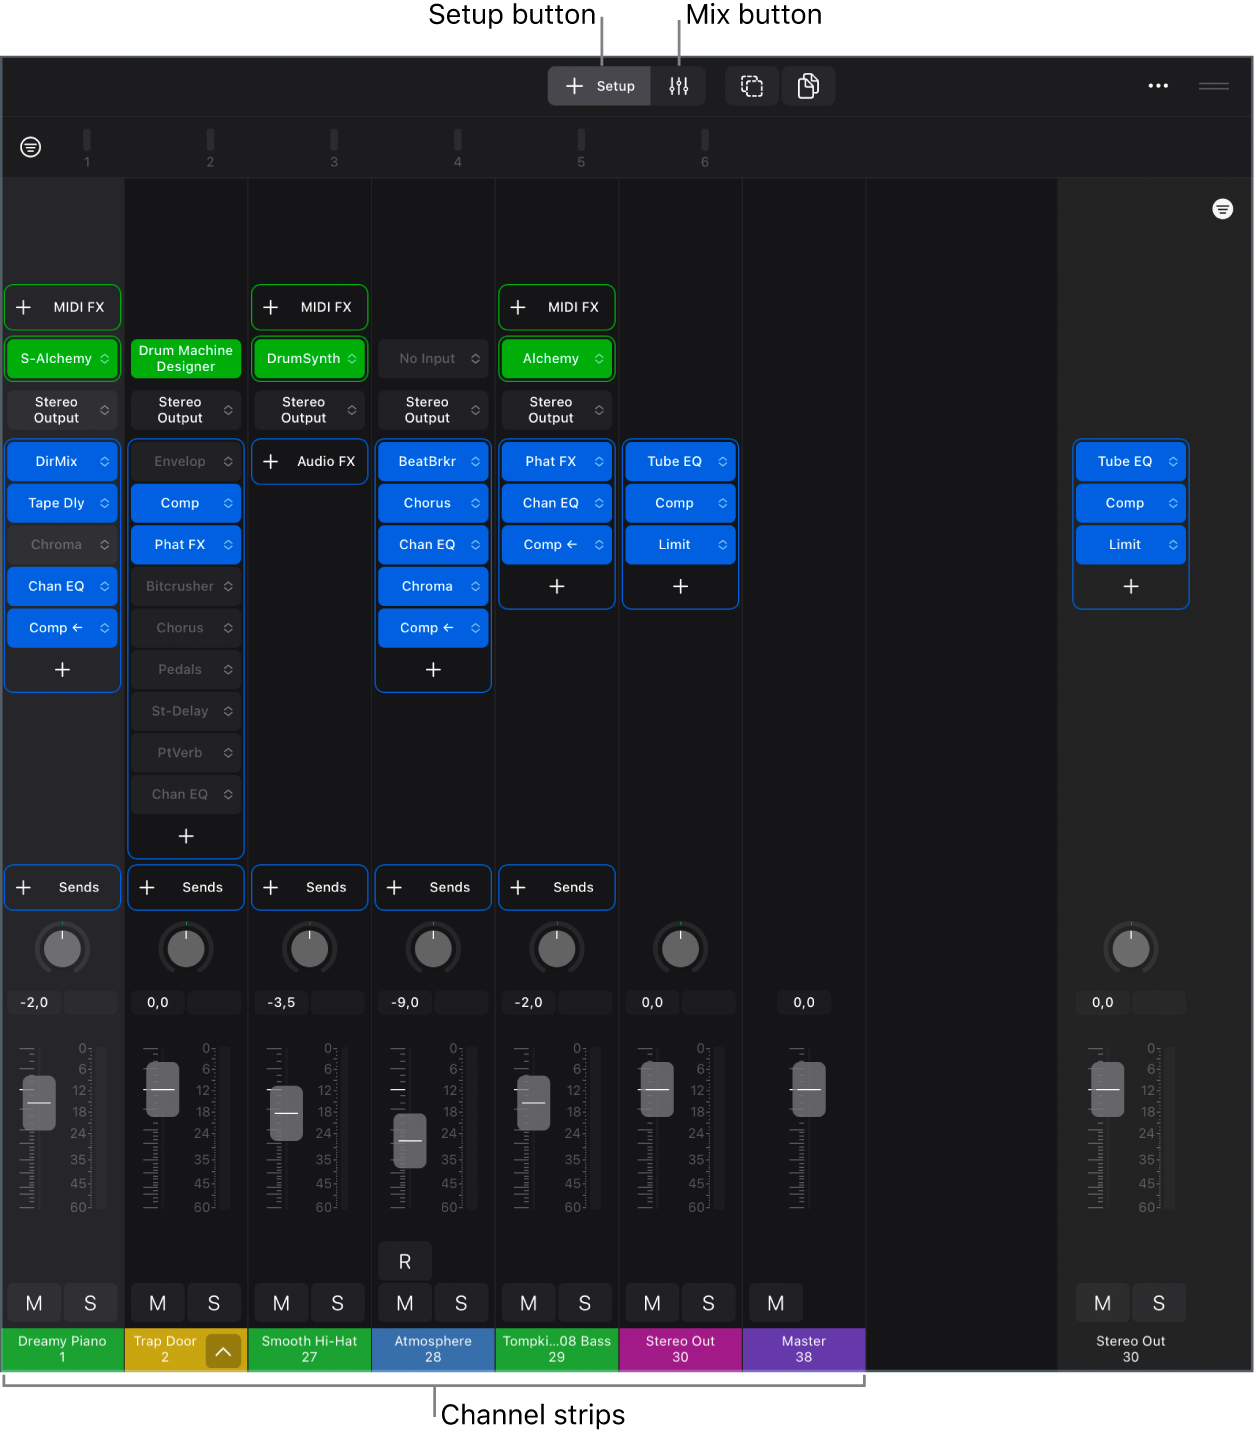 Figure. Mixer, showing Setup and Mix buttons, channel strips including plug-in slots, send slots, and channel strip controls.